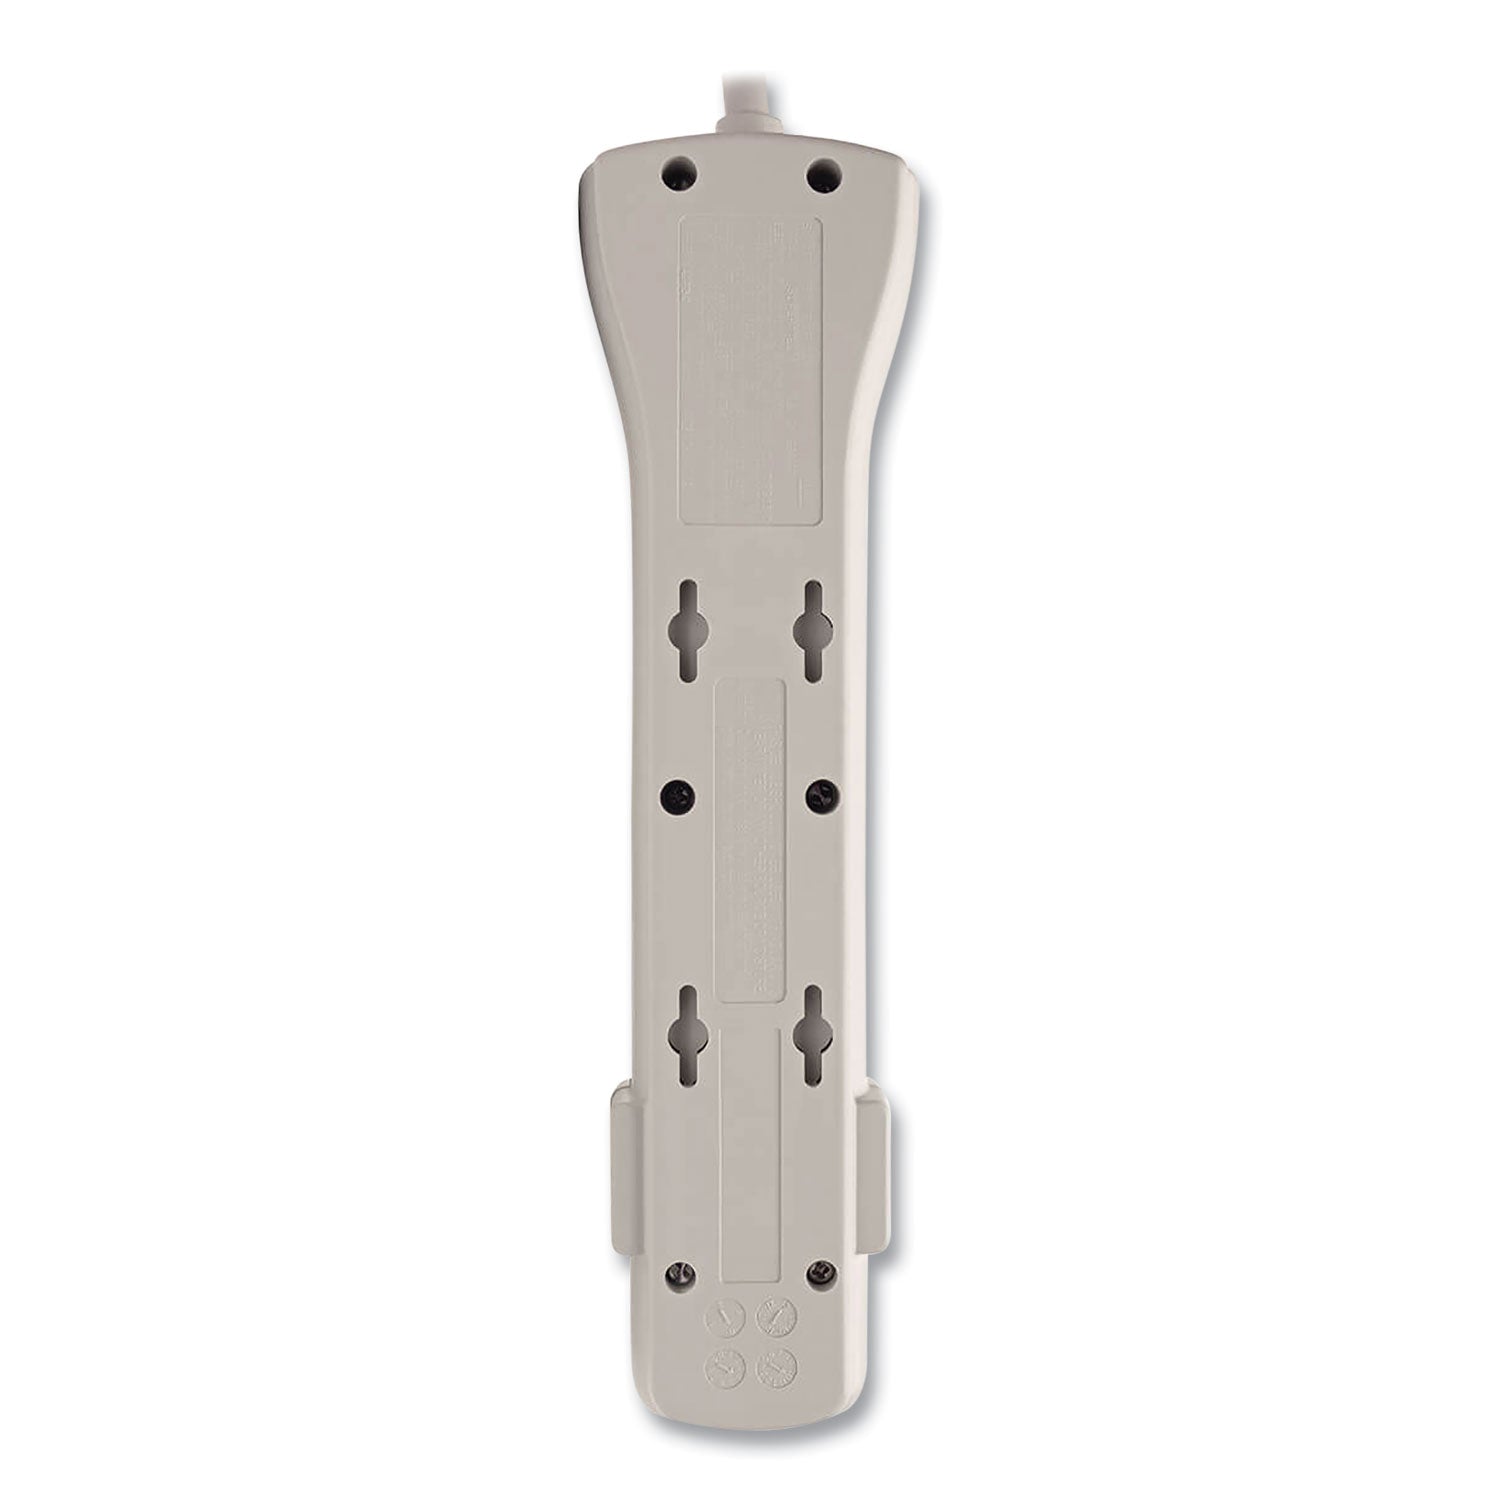 Protect It! Surge Protector, 7 AC Outlets, 15 ft Cord, 2,520 J, Light Gray - 